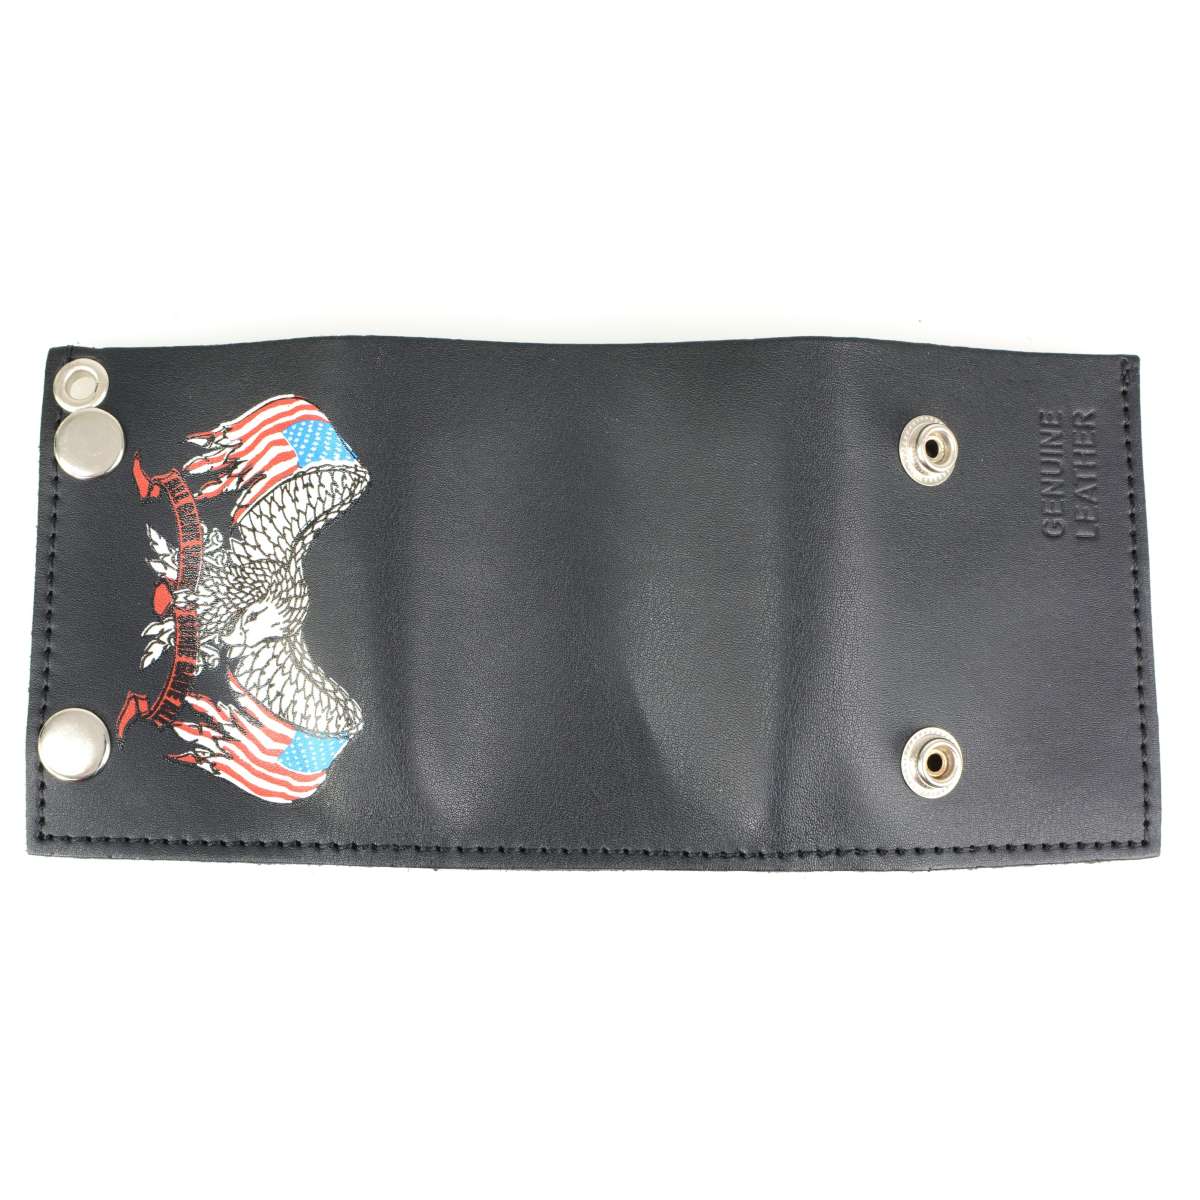 Hot Leathers Support Our Troops Wallet WLB1017